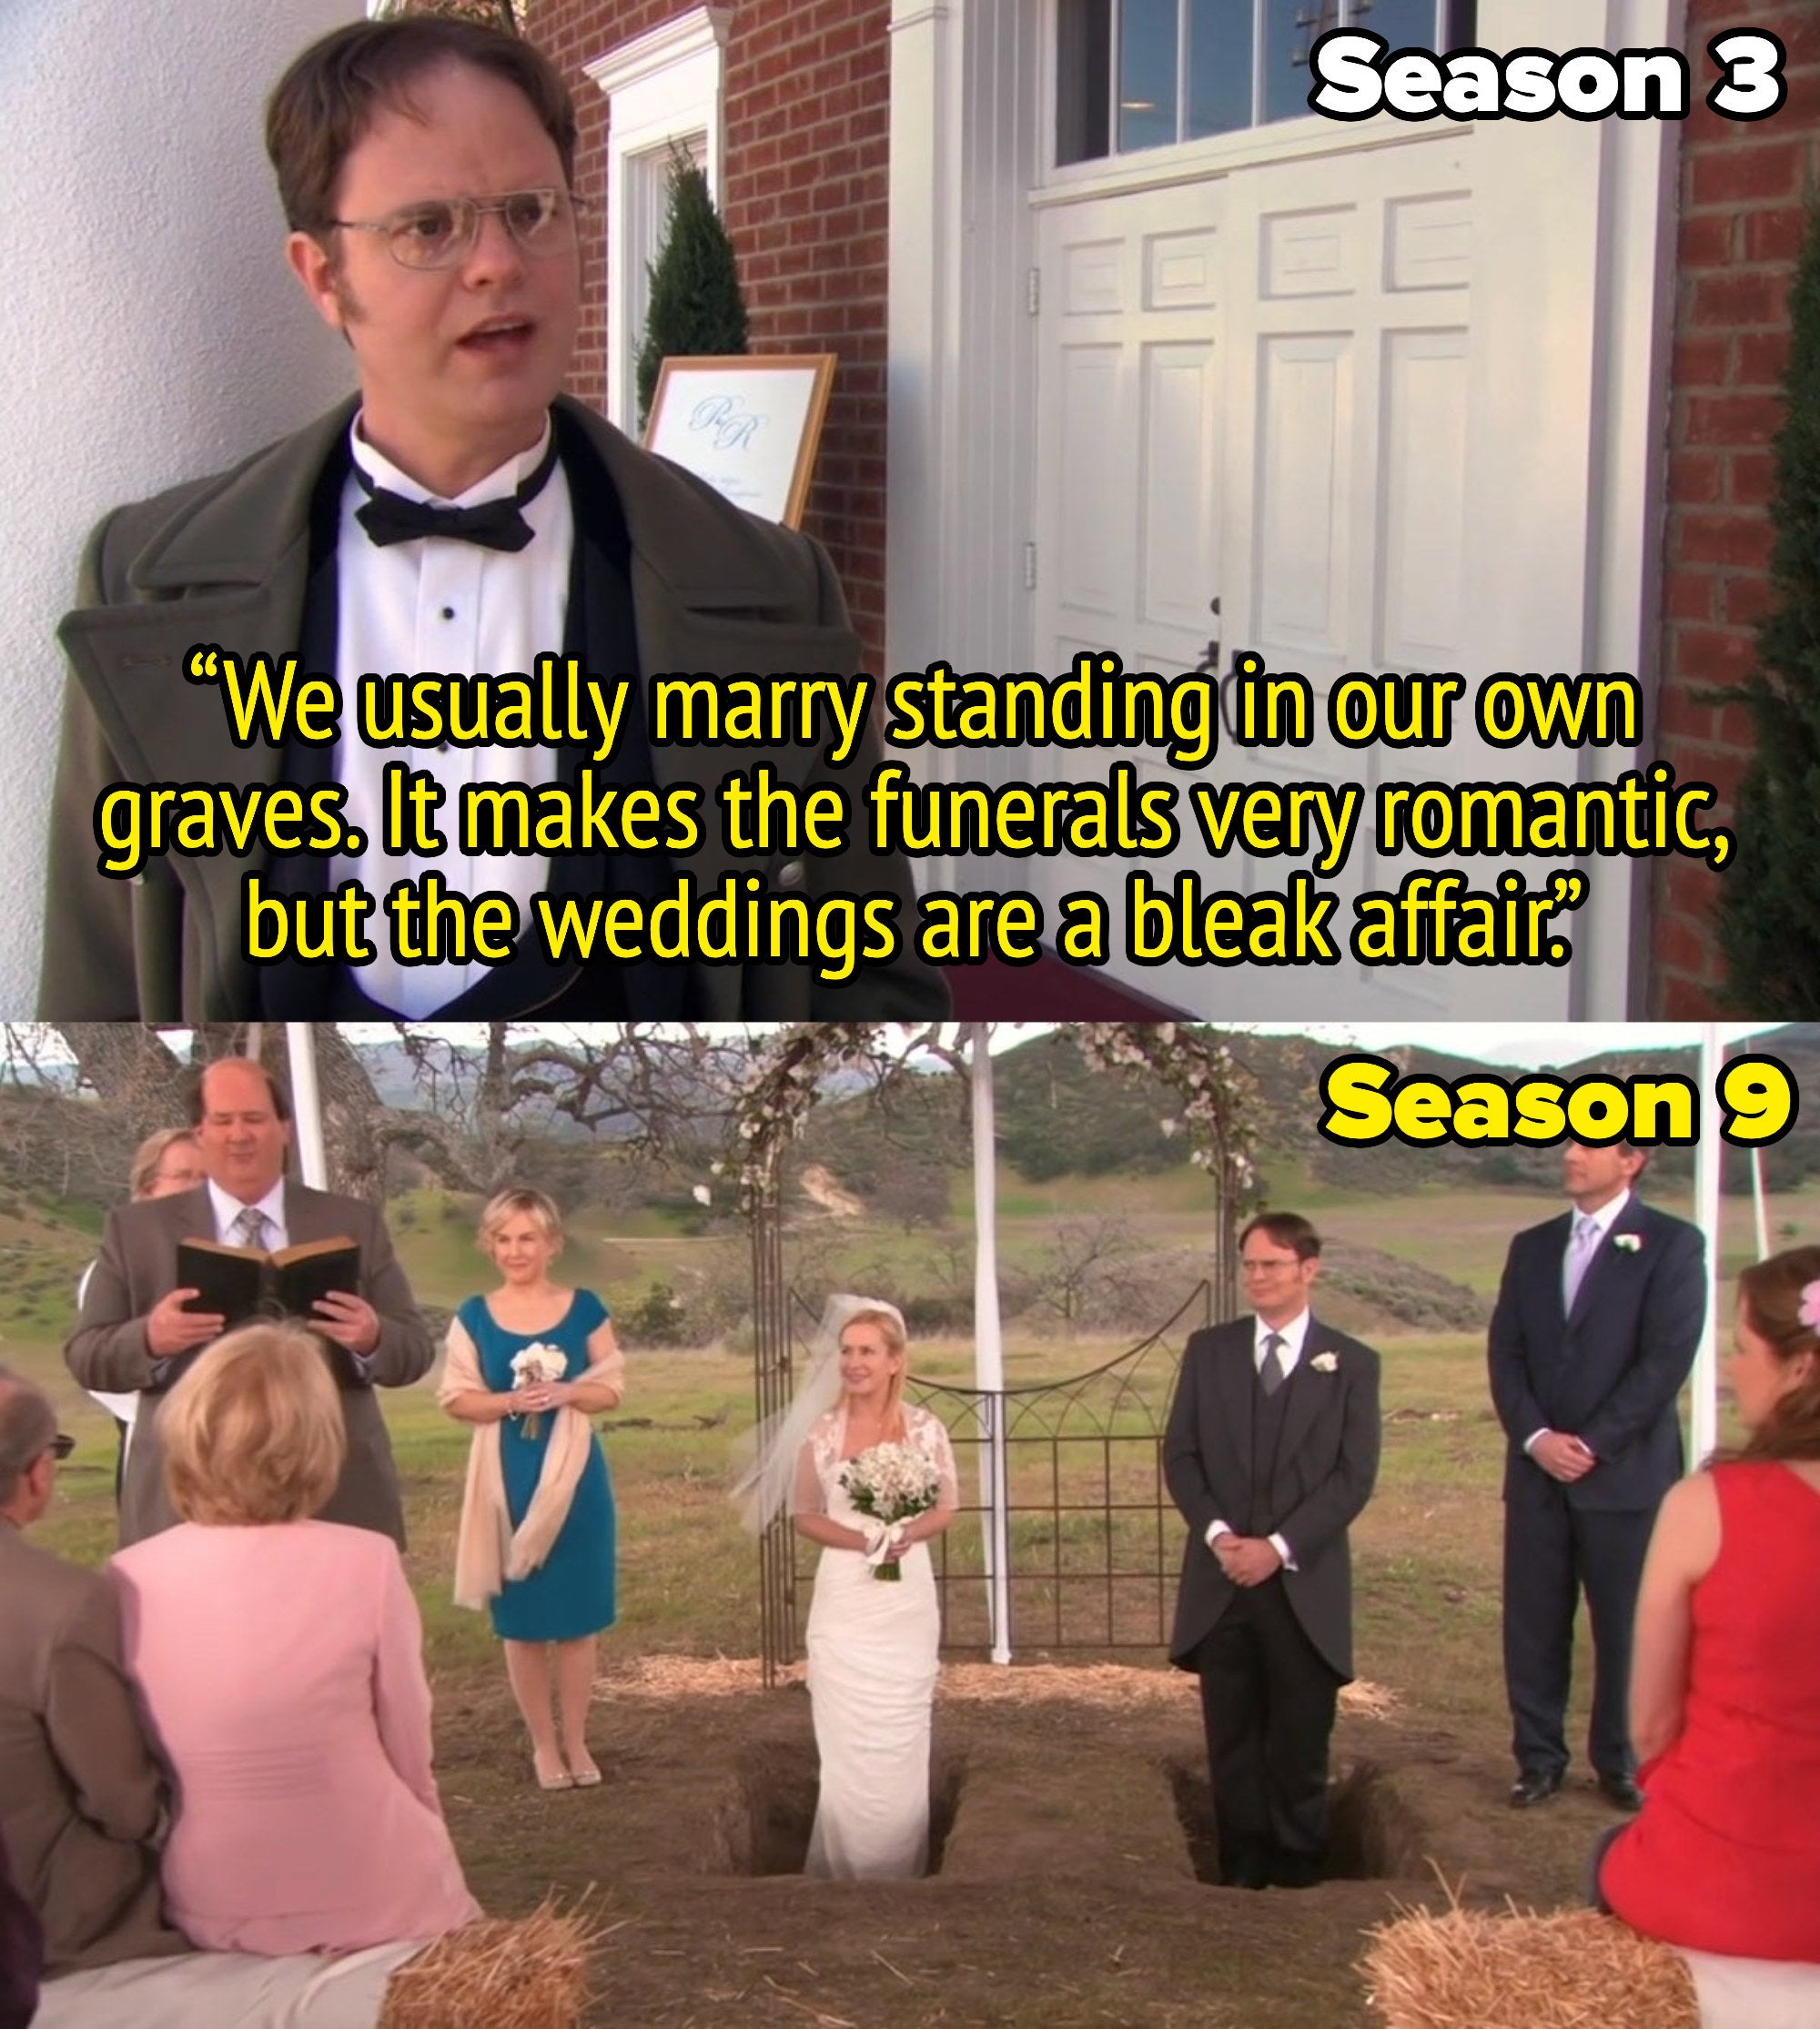 dwight from the office saying we usually marry standing in our own graves. It makes the funerals very romantic, but the weddings are a bleak affair